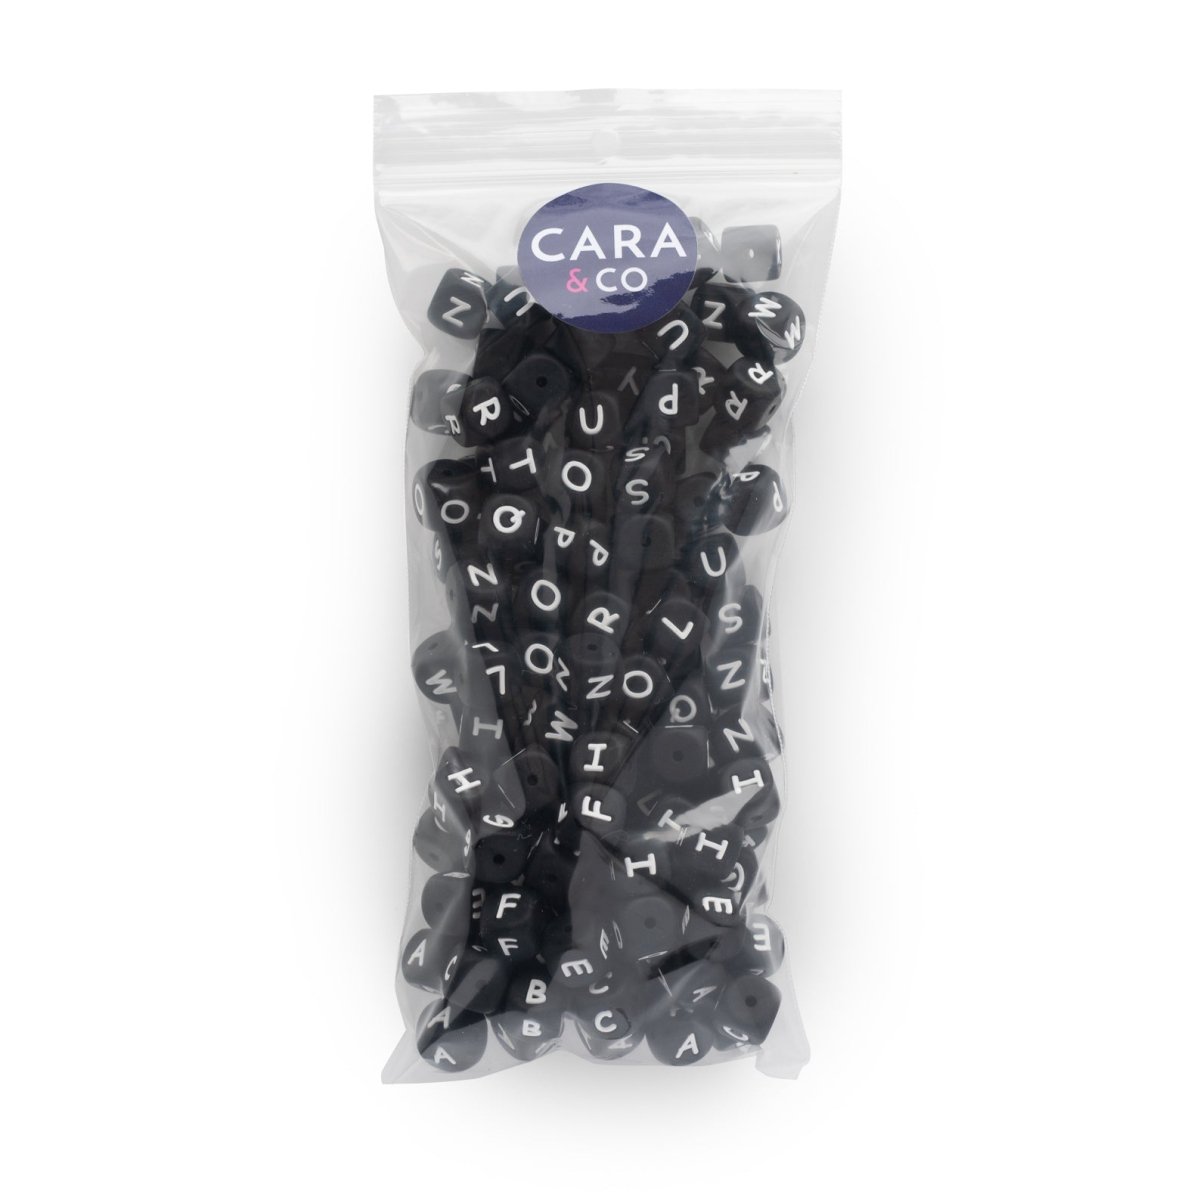 Silicone Shape Beads Alphabet - Square Black Starter Kit - 125 letters from Cara & Co Craft Supply